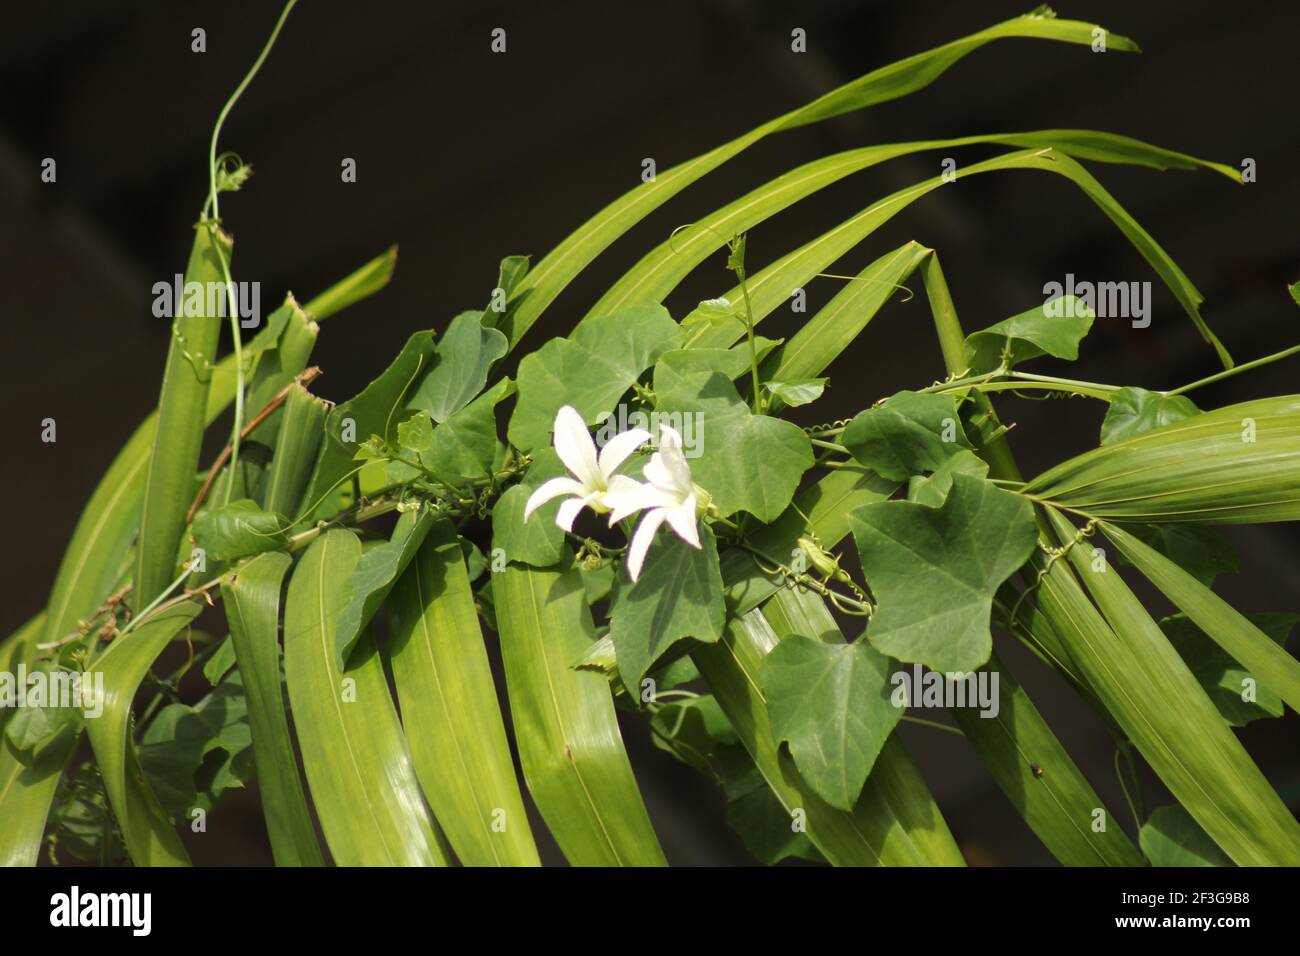 Wild cucumber vine and flowers on palm branch Stock Photo